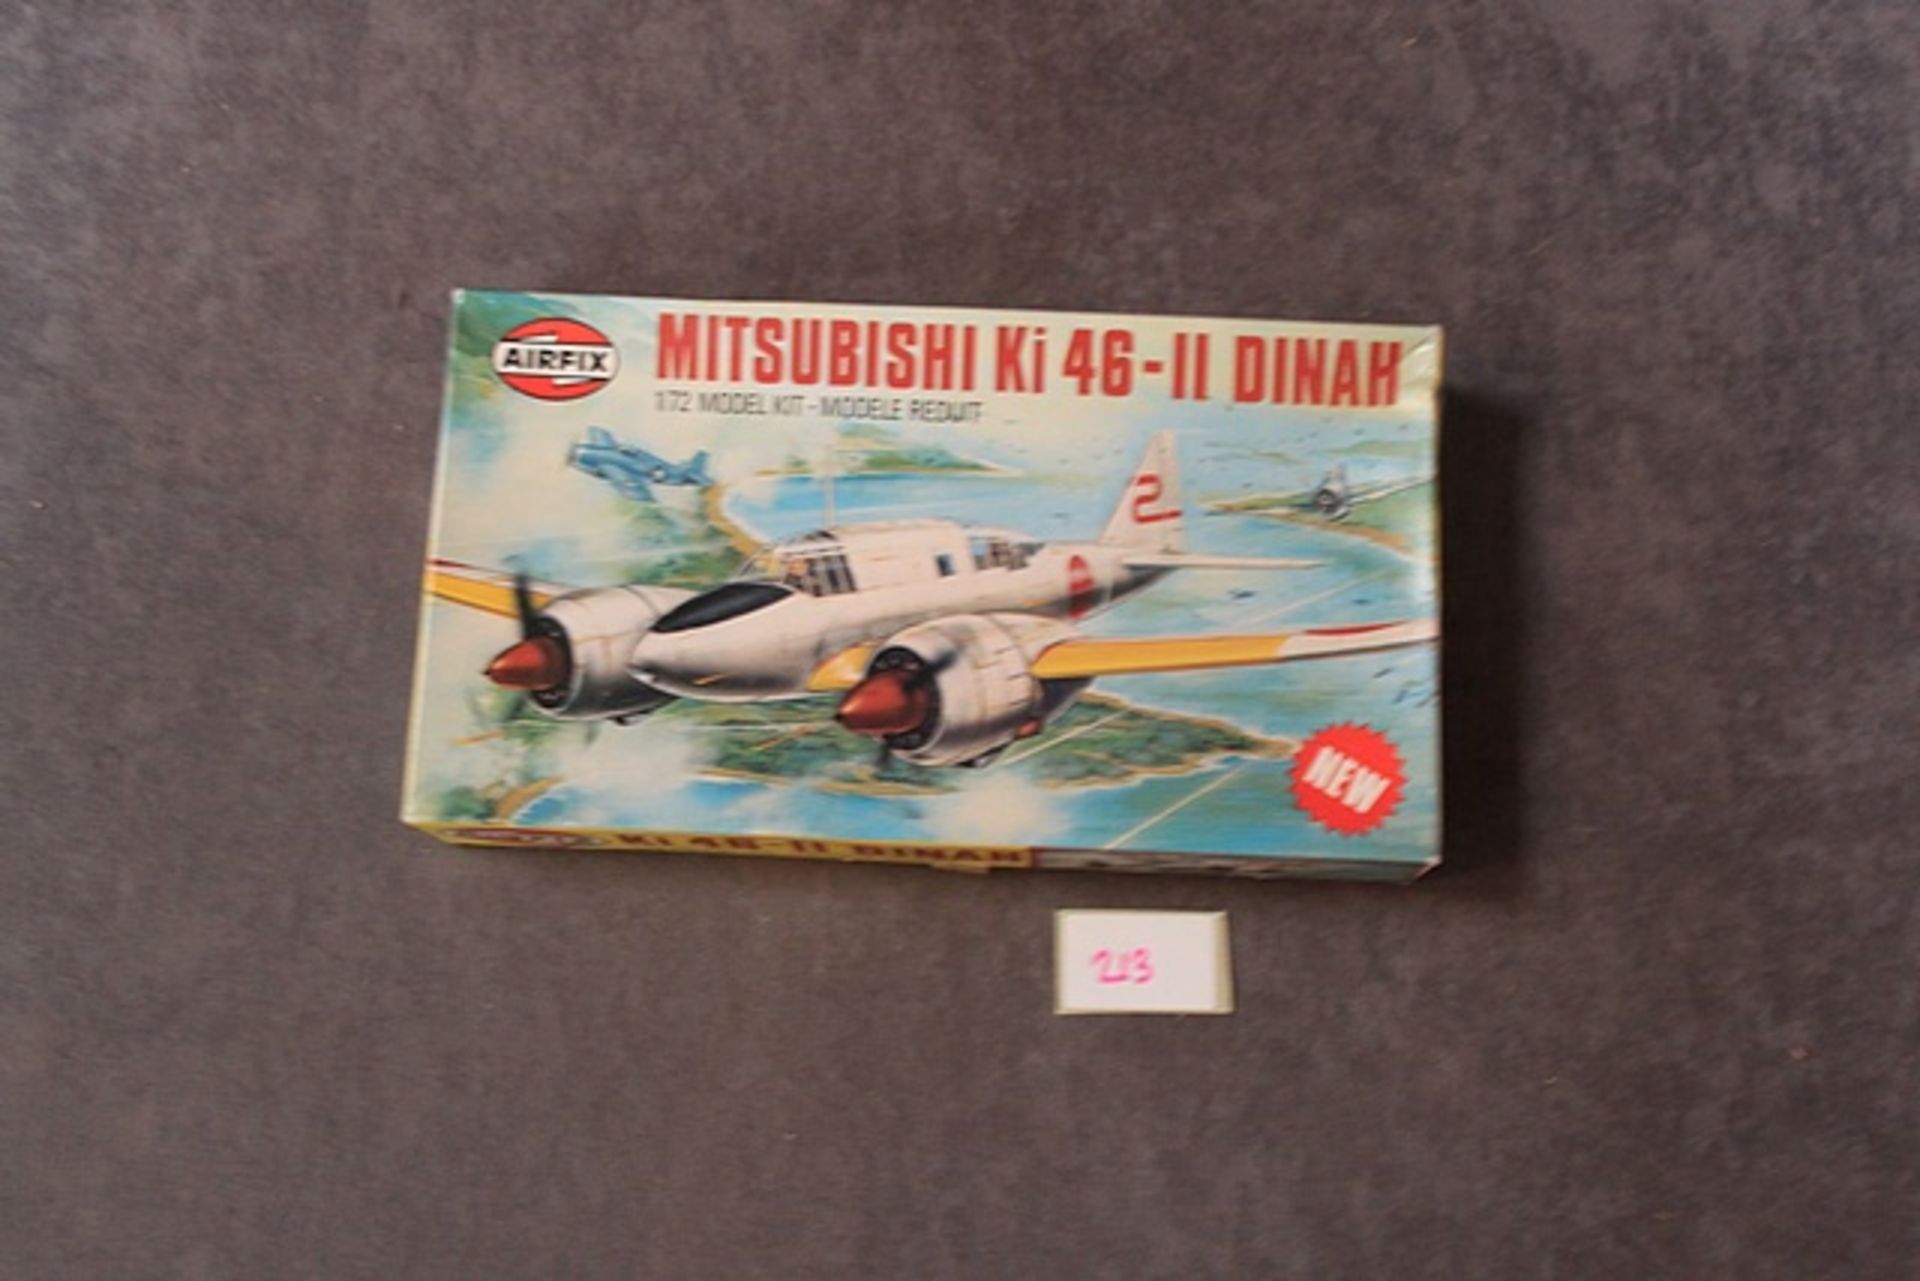 Airfix - 72 Scale Mitsubishi Ki 46-11 Dinah Pattern No 02016-1 Series 2 On Sprues With - Image 2 of 2